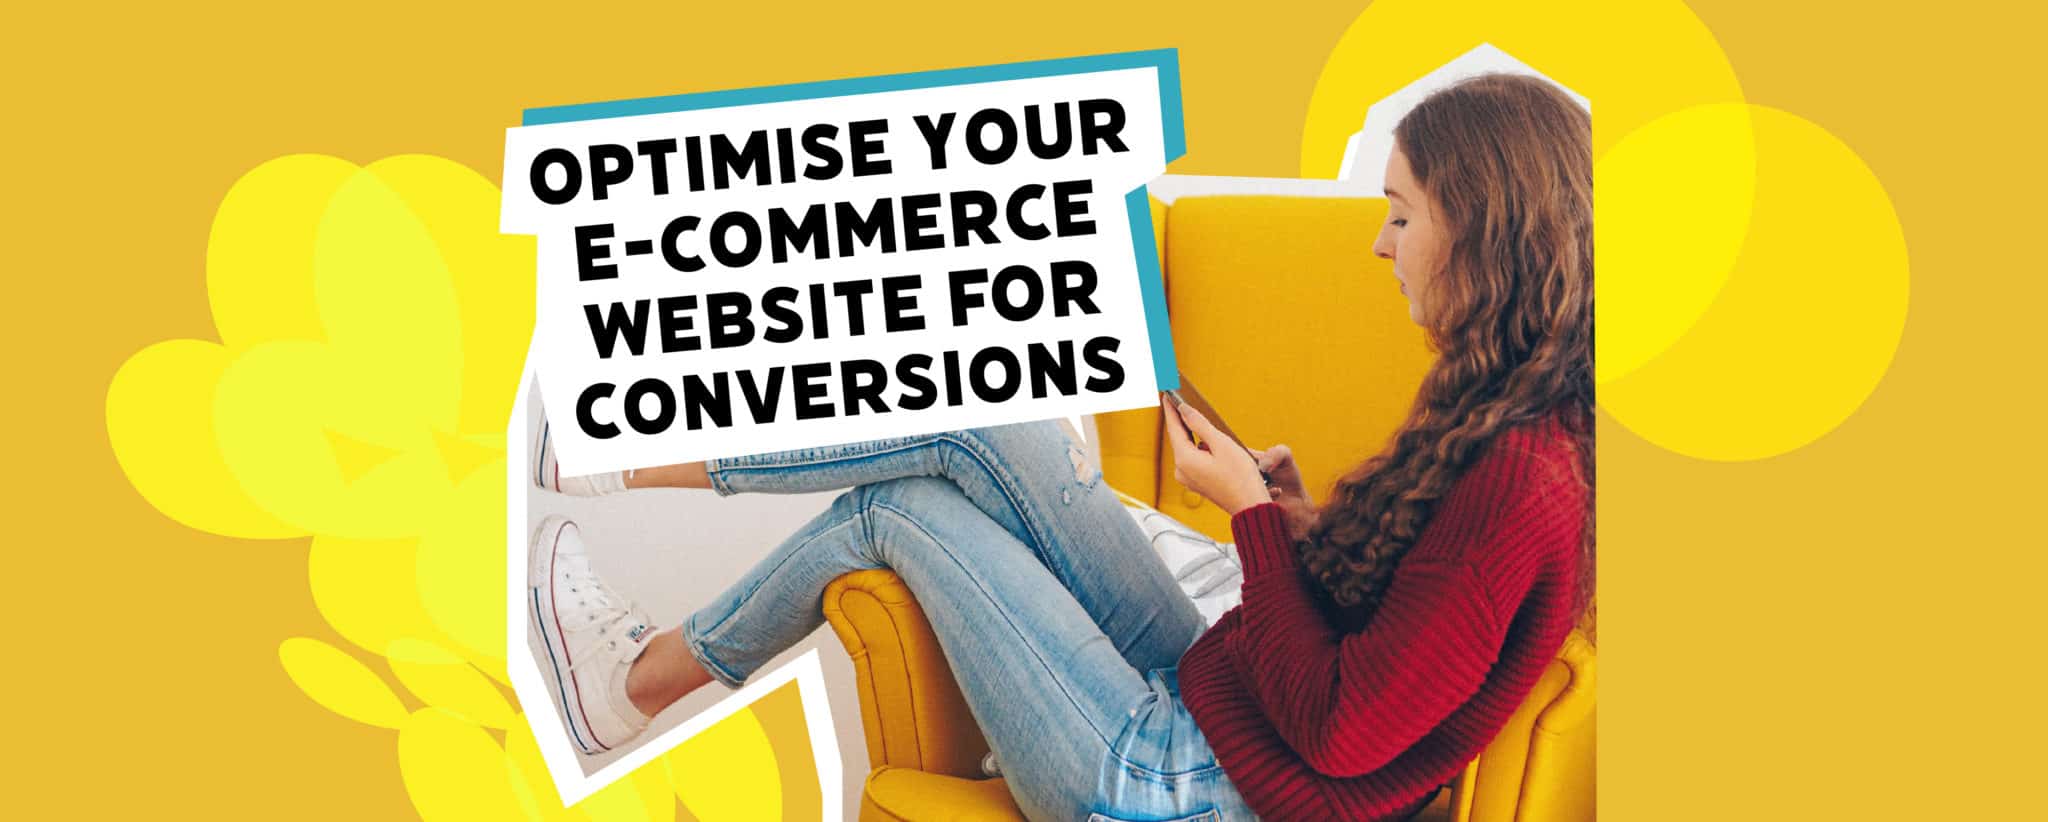 How to Optimise Your E Commerce Website for Conversions Blog banner